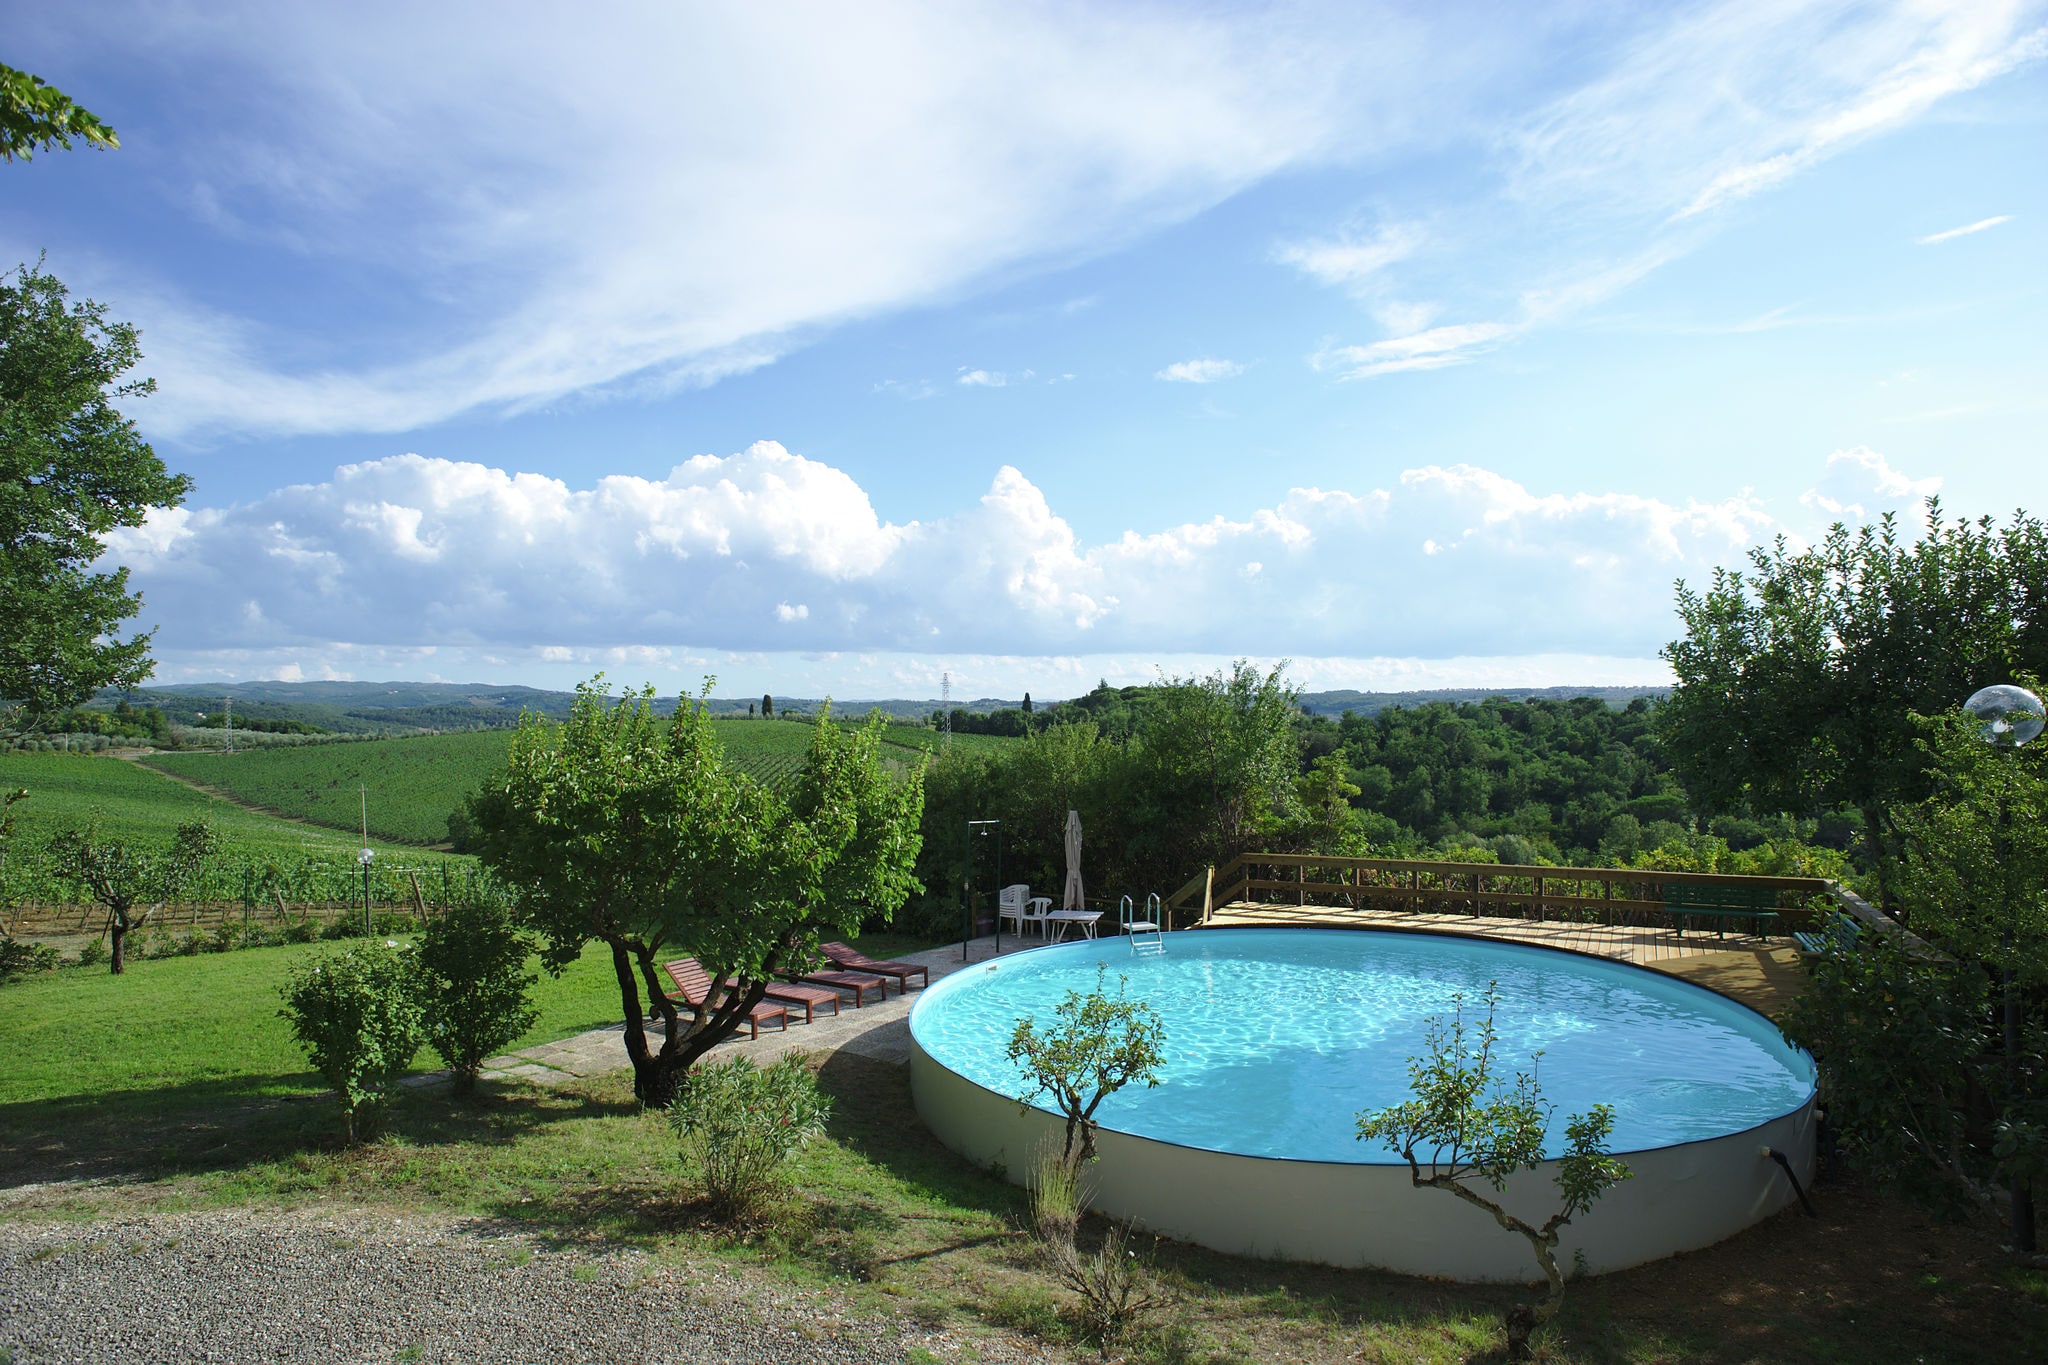 A part of a beautiful mansion with view of the Chianti Classico hills